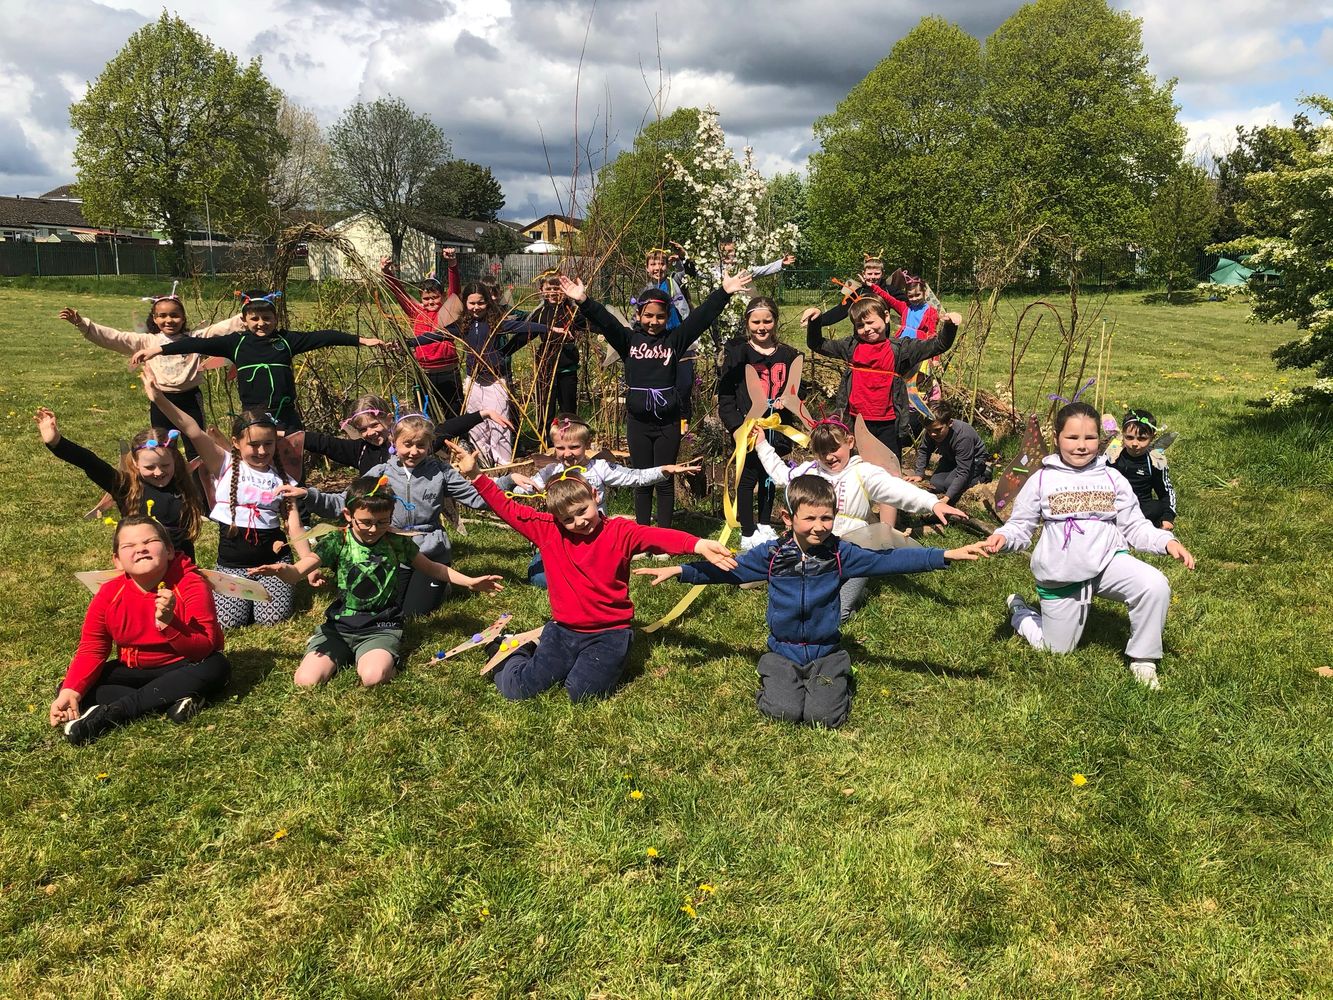 Children enjoying drama class together outside in the field